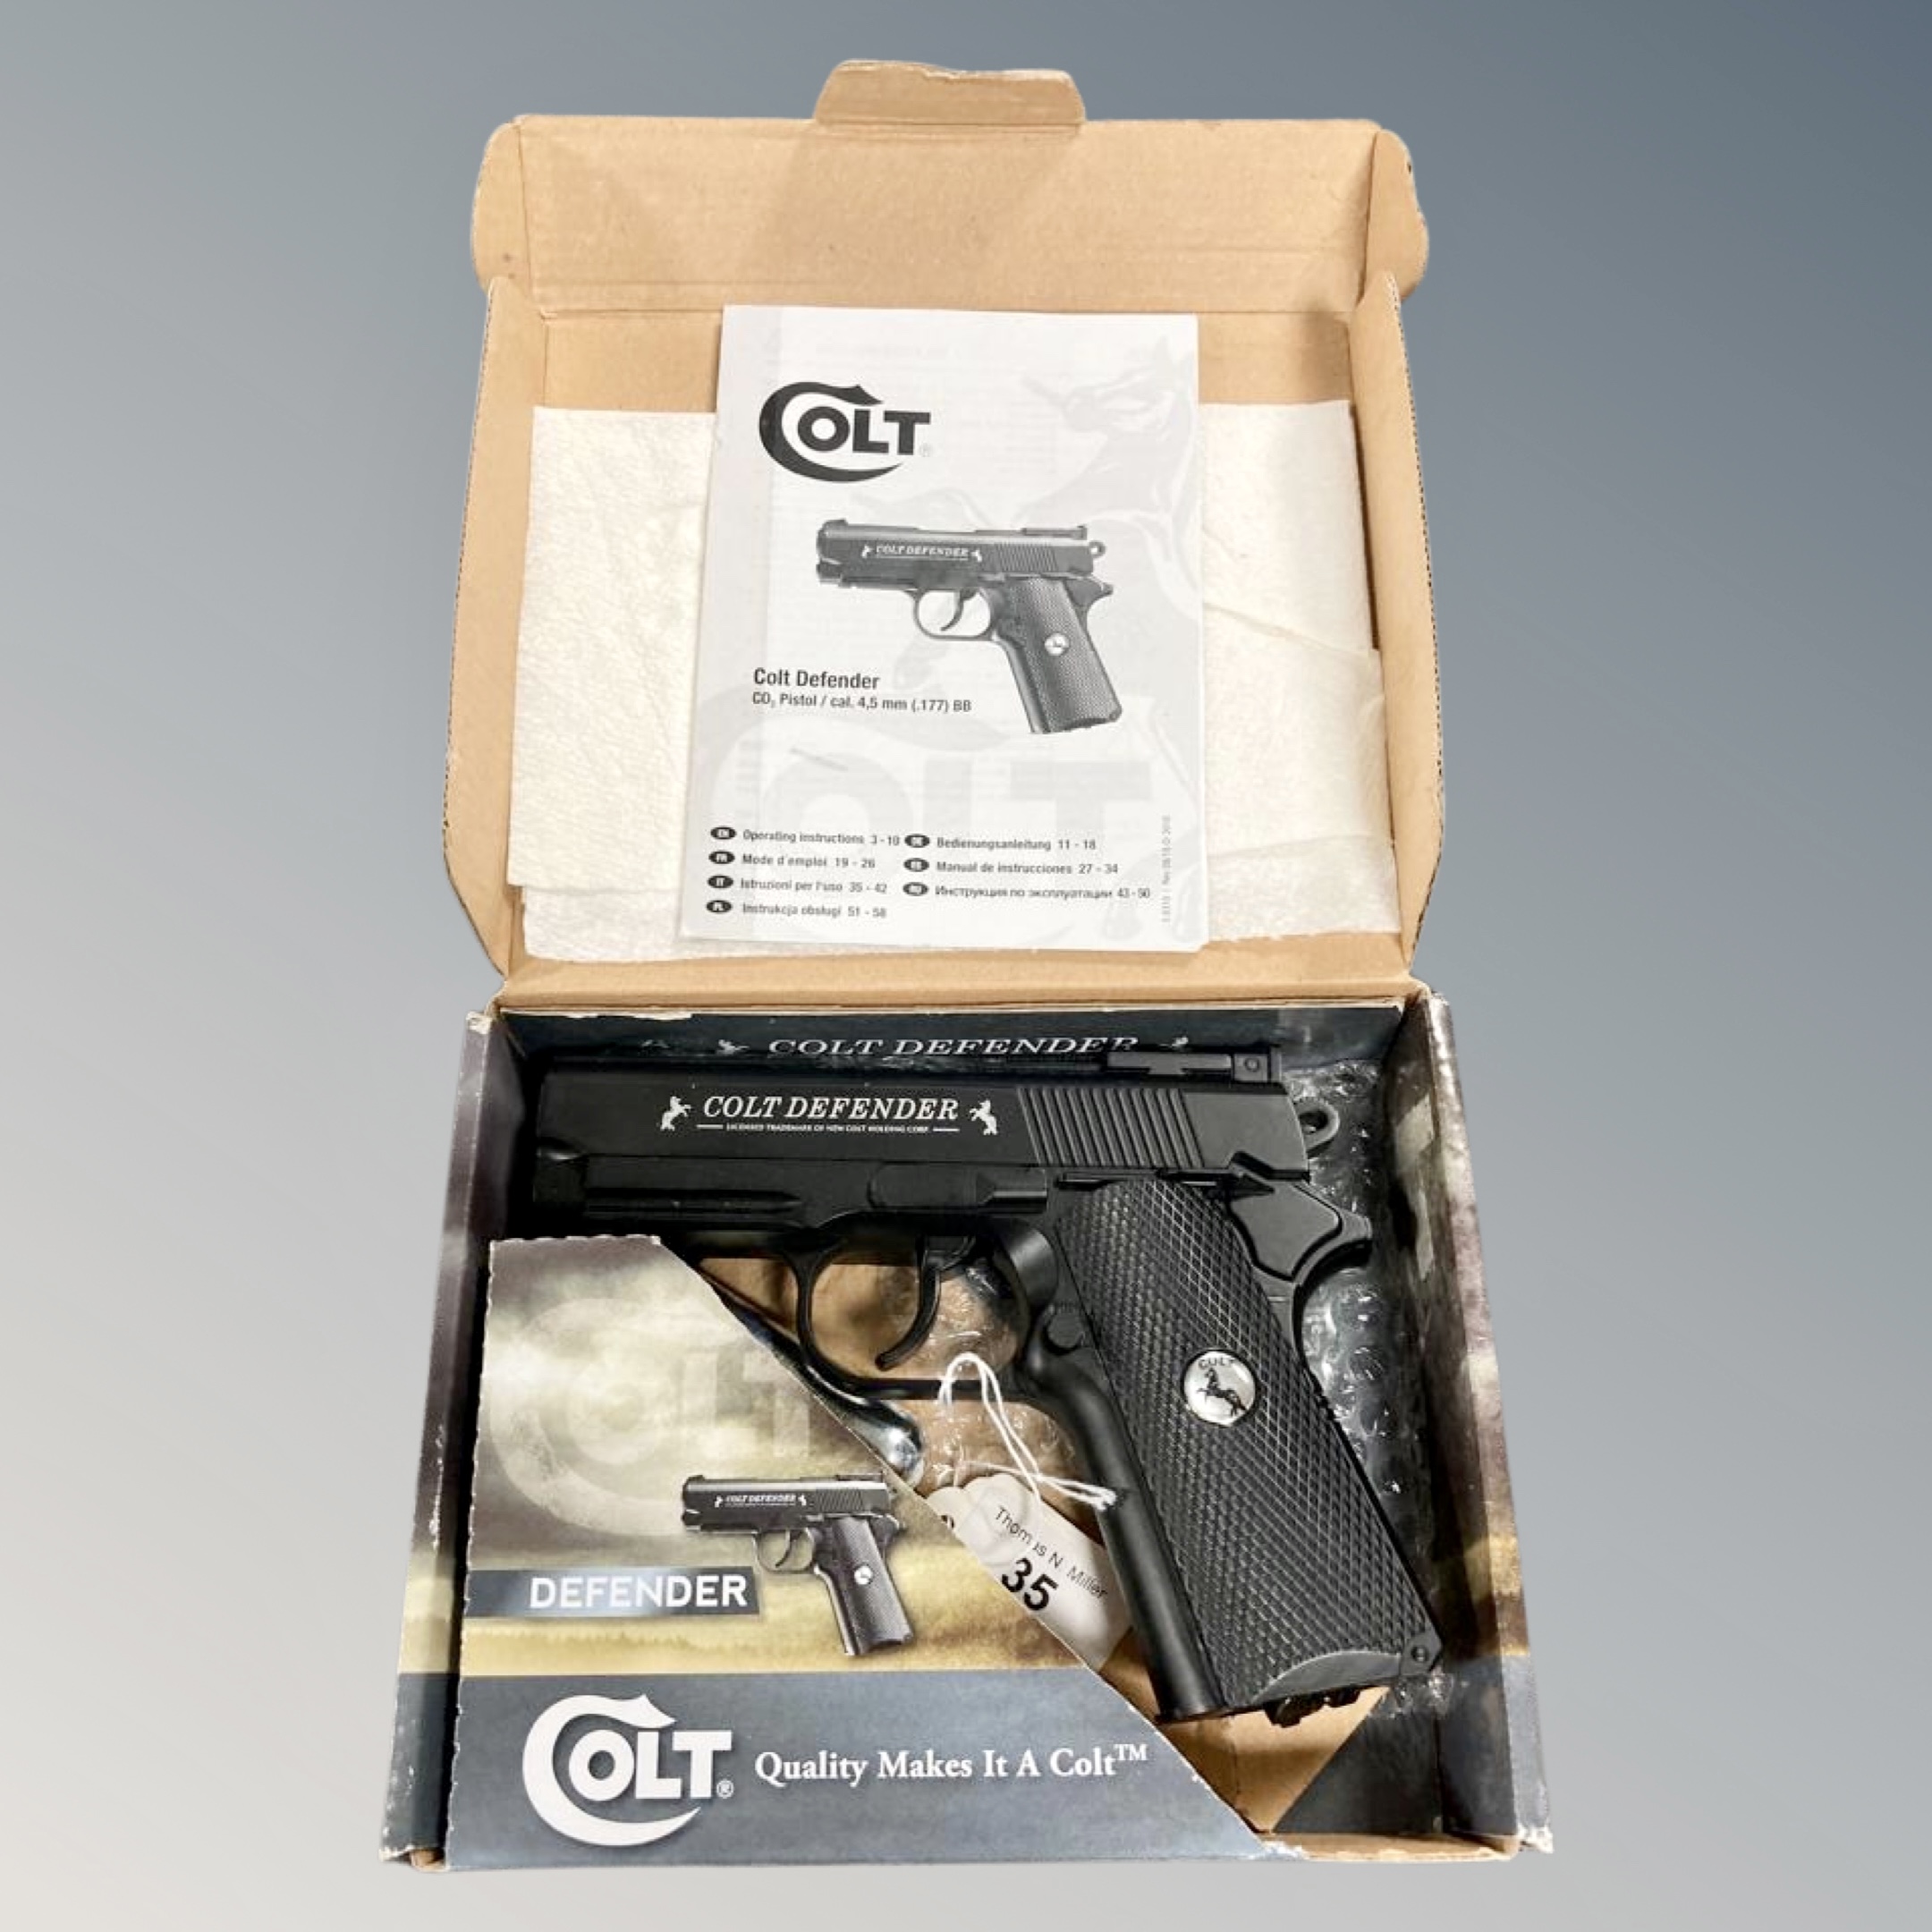 A Colt Defender .177 CO2 powered air pistol in original box with manual.